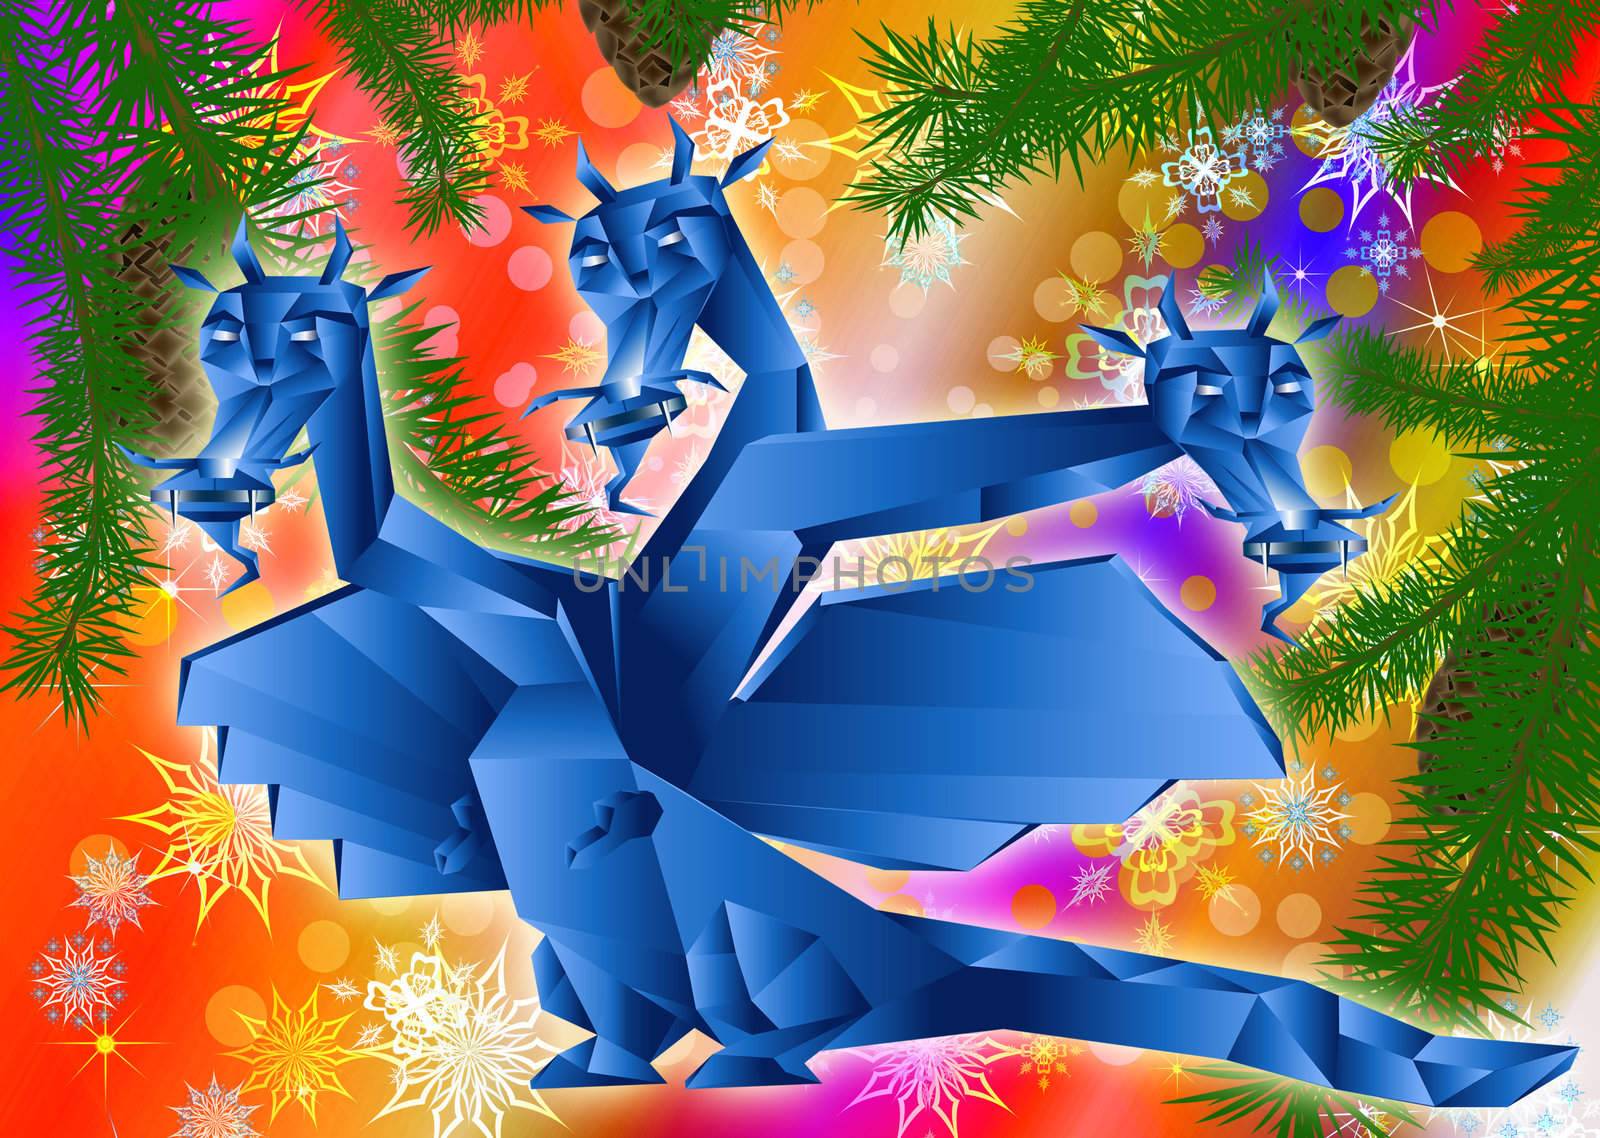 Fantastic dragon a symbol 2012 new years on abstract background